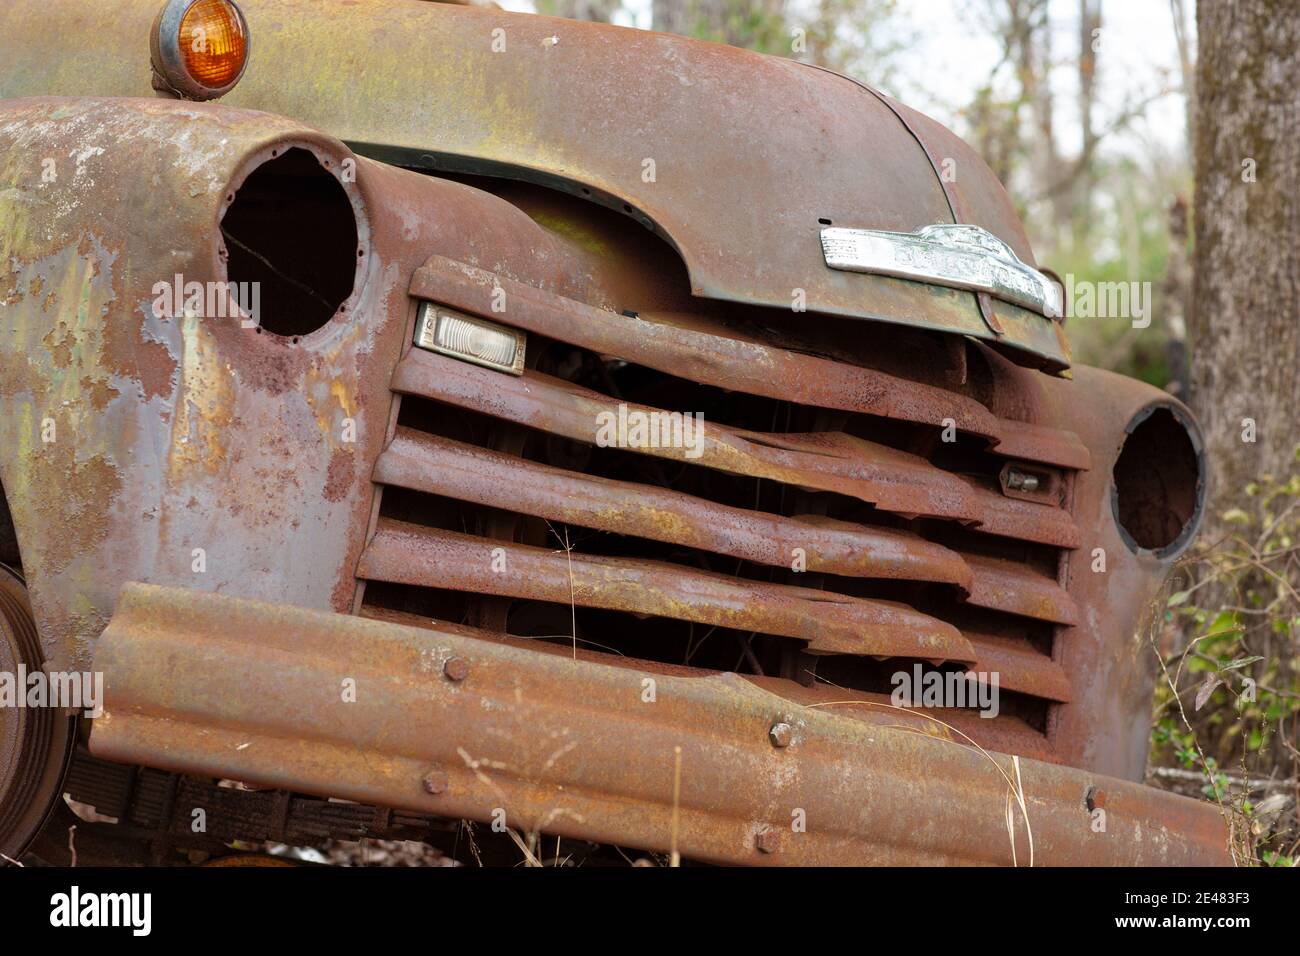 The grill of an old, rusty 1949 Chevrolet half ton pick-up work truck, in the woods, at Chrysler, Alabama  Chevrolet Advance-Design cab trucks were ma Stock Photo